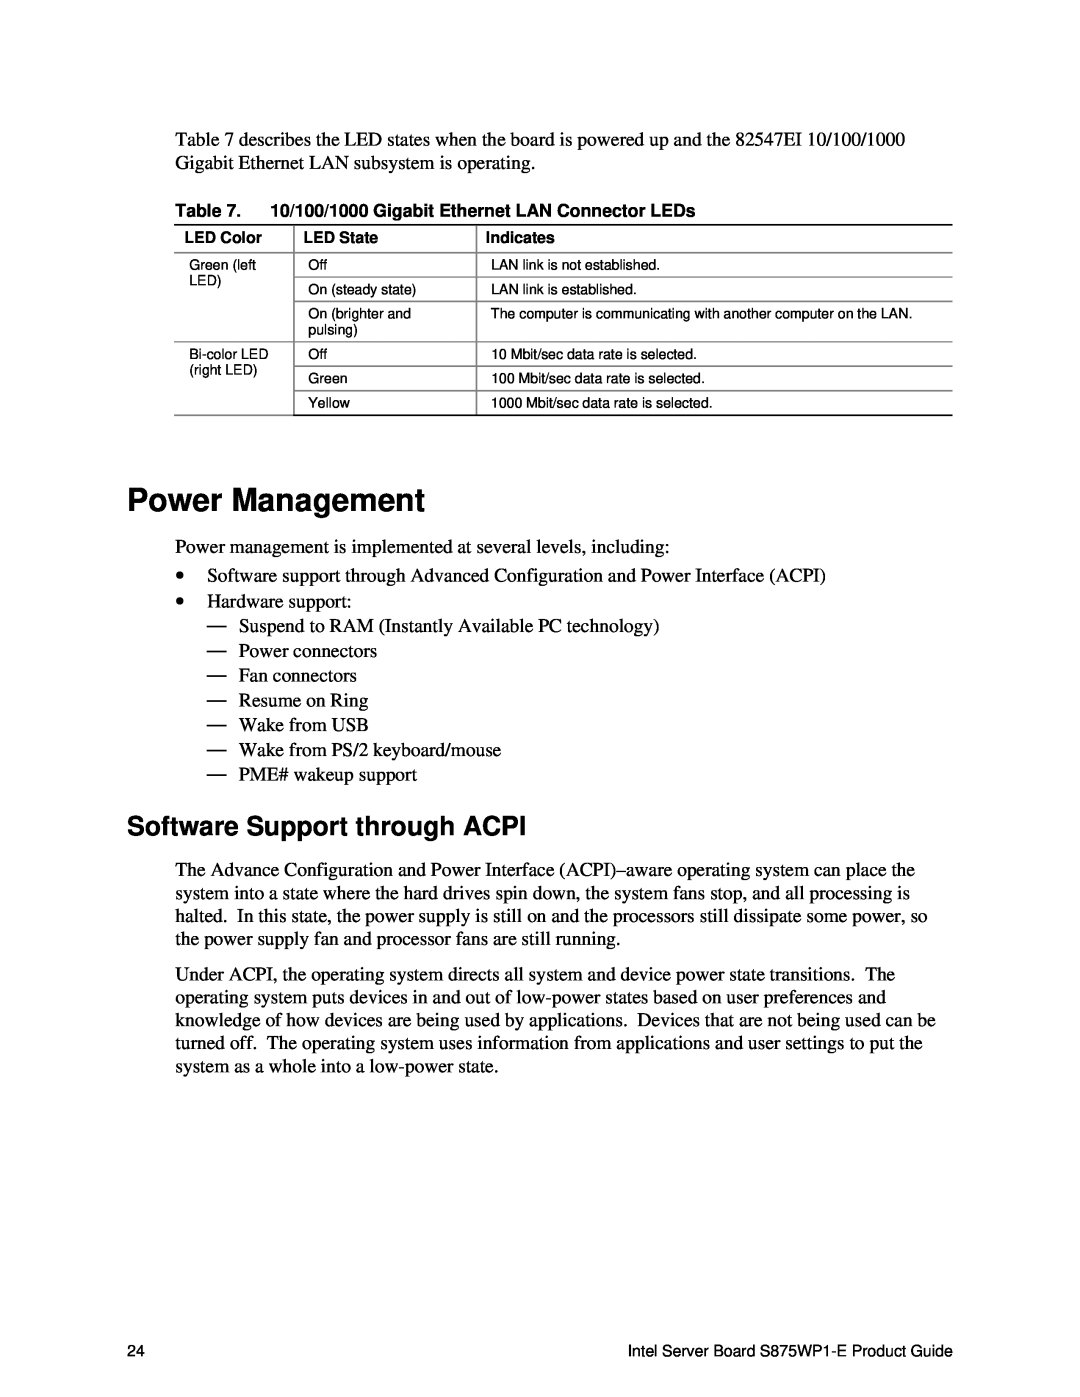 Intel S875WP1-E manual Power Management, Software Support through ACPI 